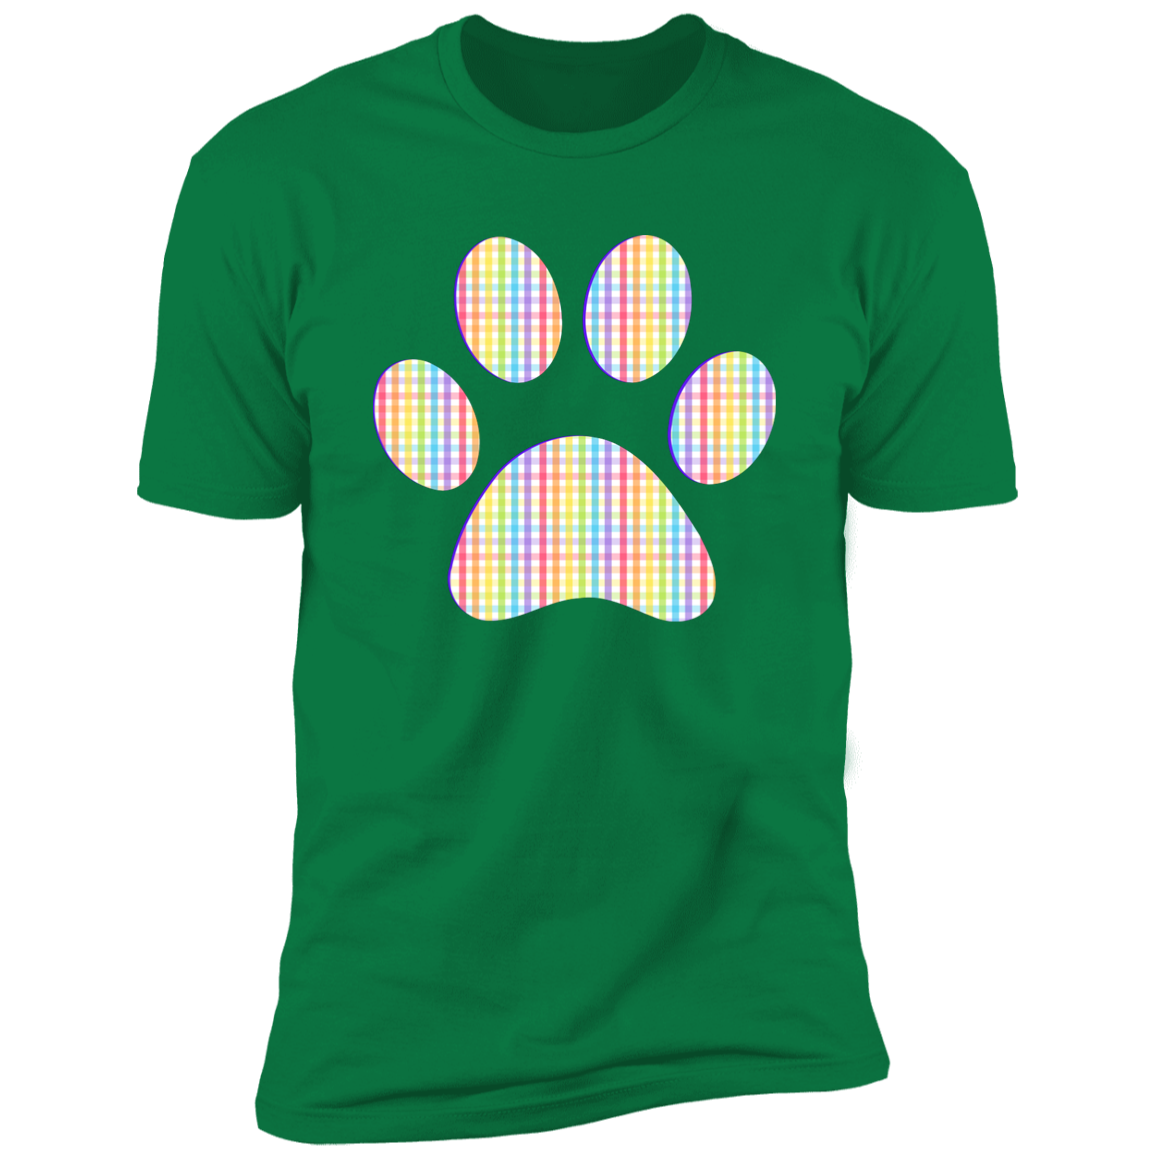 Pride Paw (Gingham) Pride T-shirt, Paw Pride Dog Shirt for humans, in kelly green